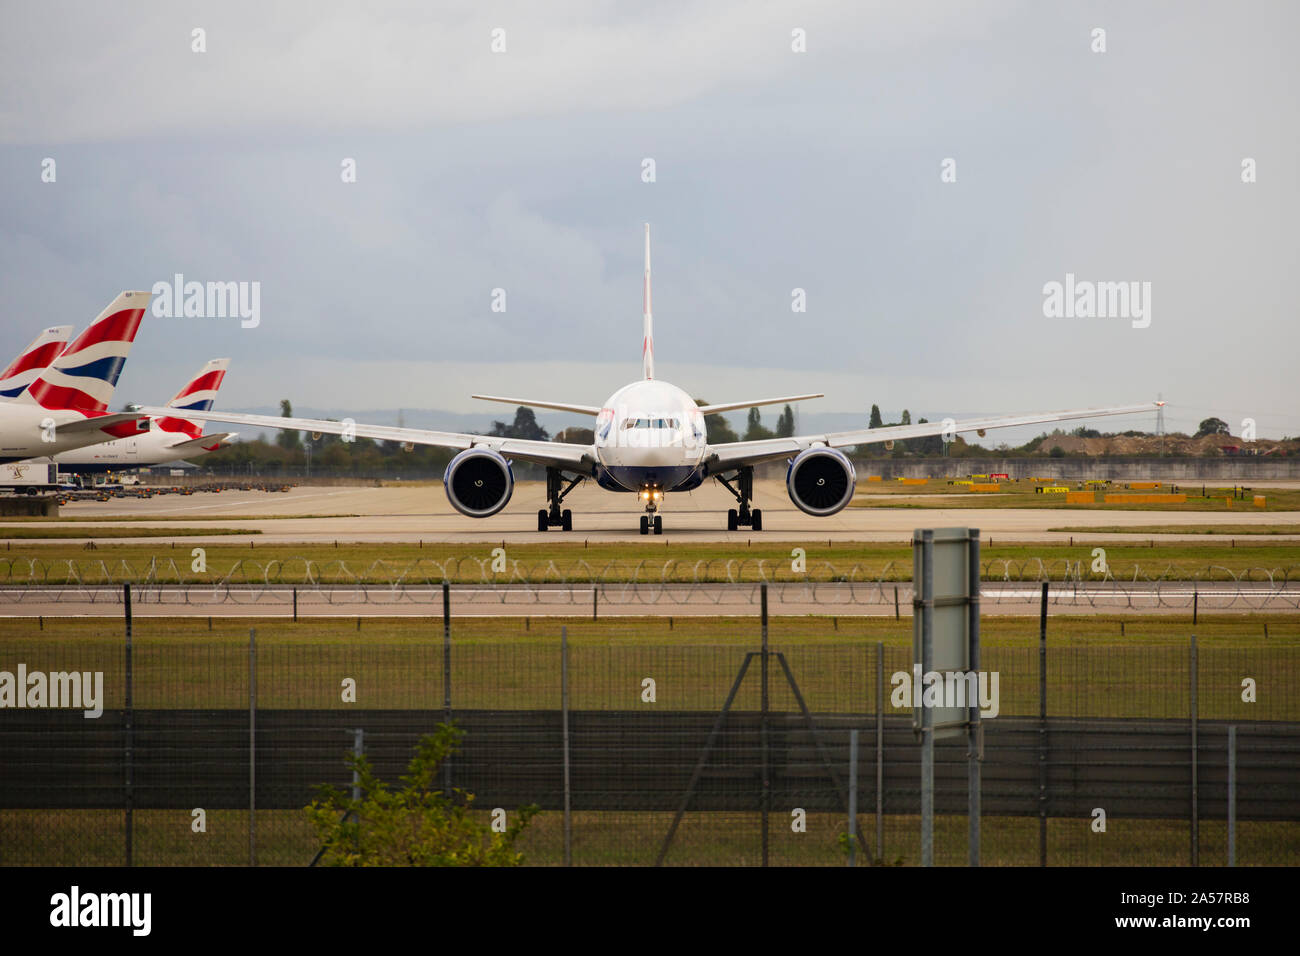 British Airways Boeing 777-236 airliner taking off from London Heathrow Airport. England. October 2019 Stock Photo